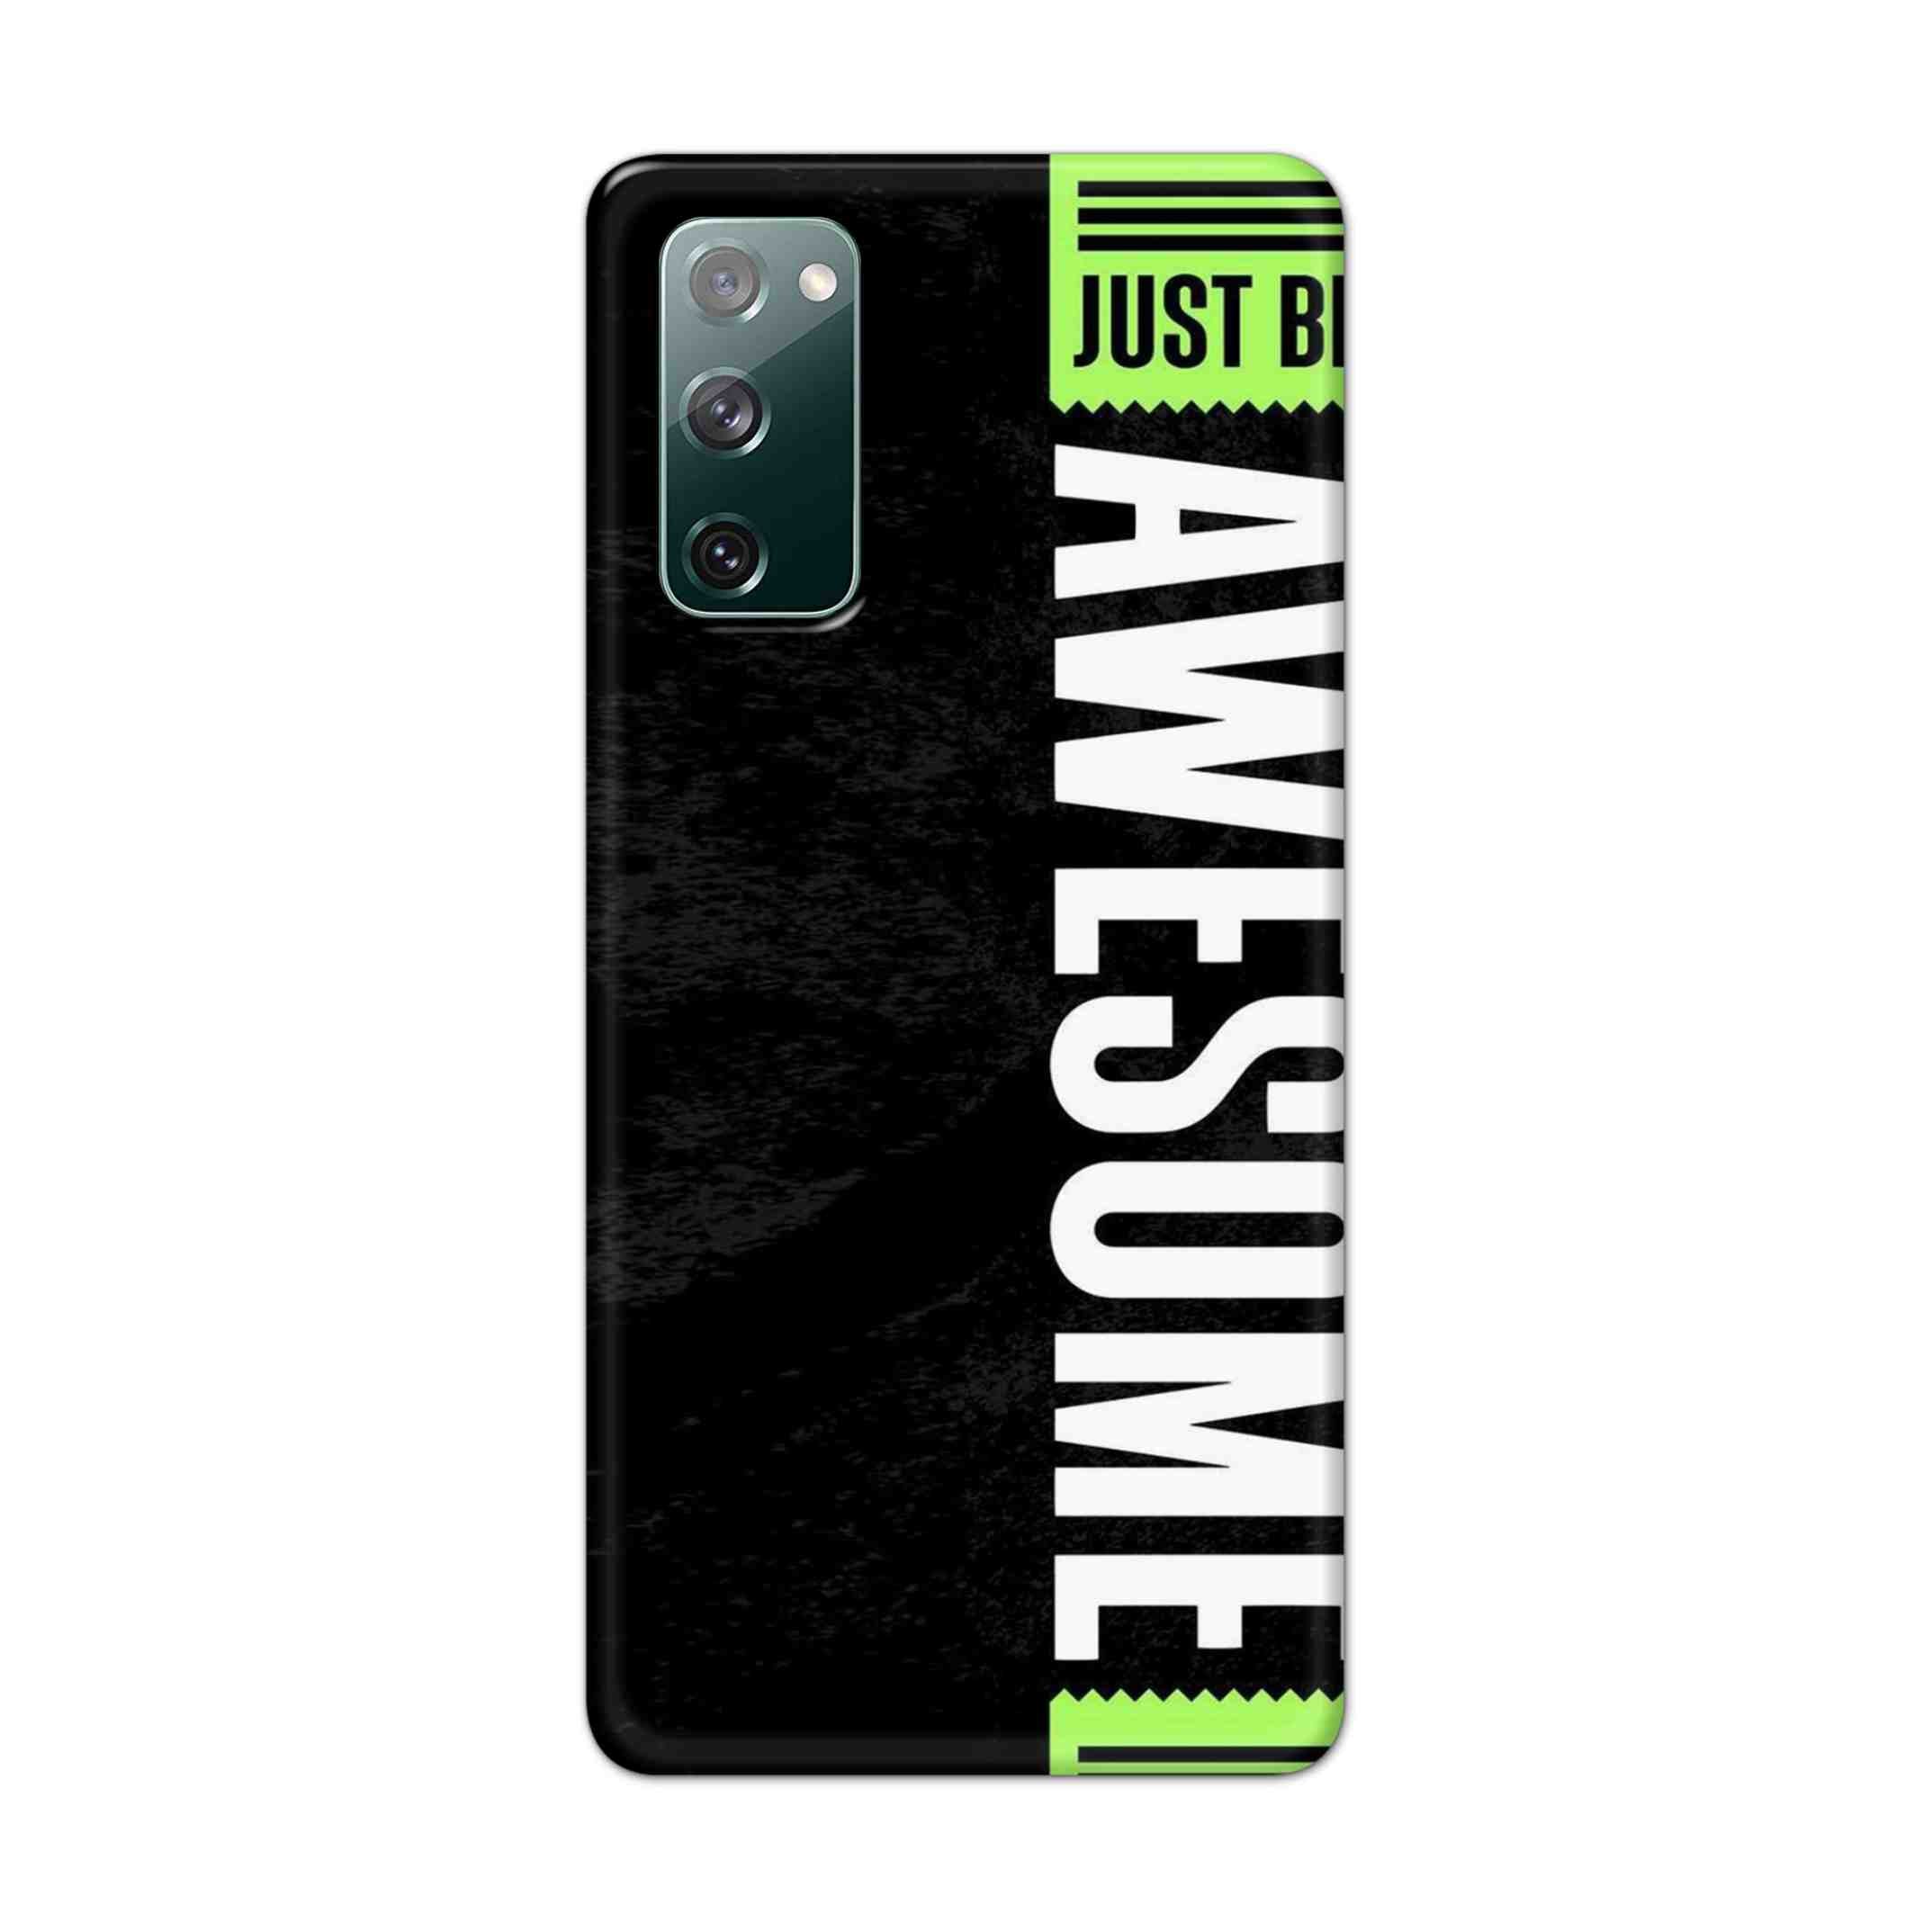 Buy Awesome Street Hard Back Mobile Phone Case Cover For Samsung Galaxy S20 FE Online